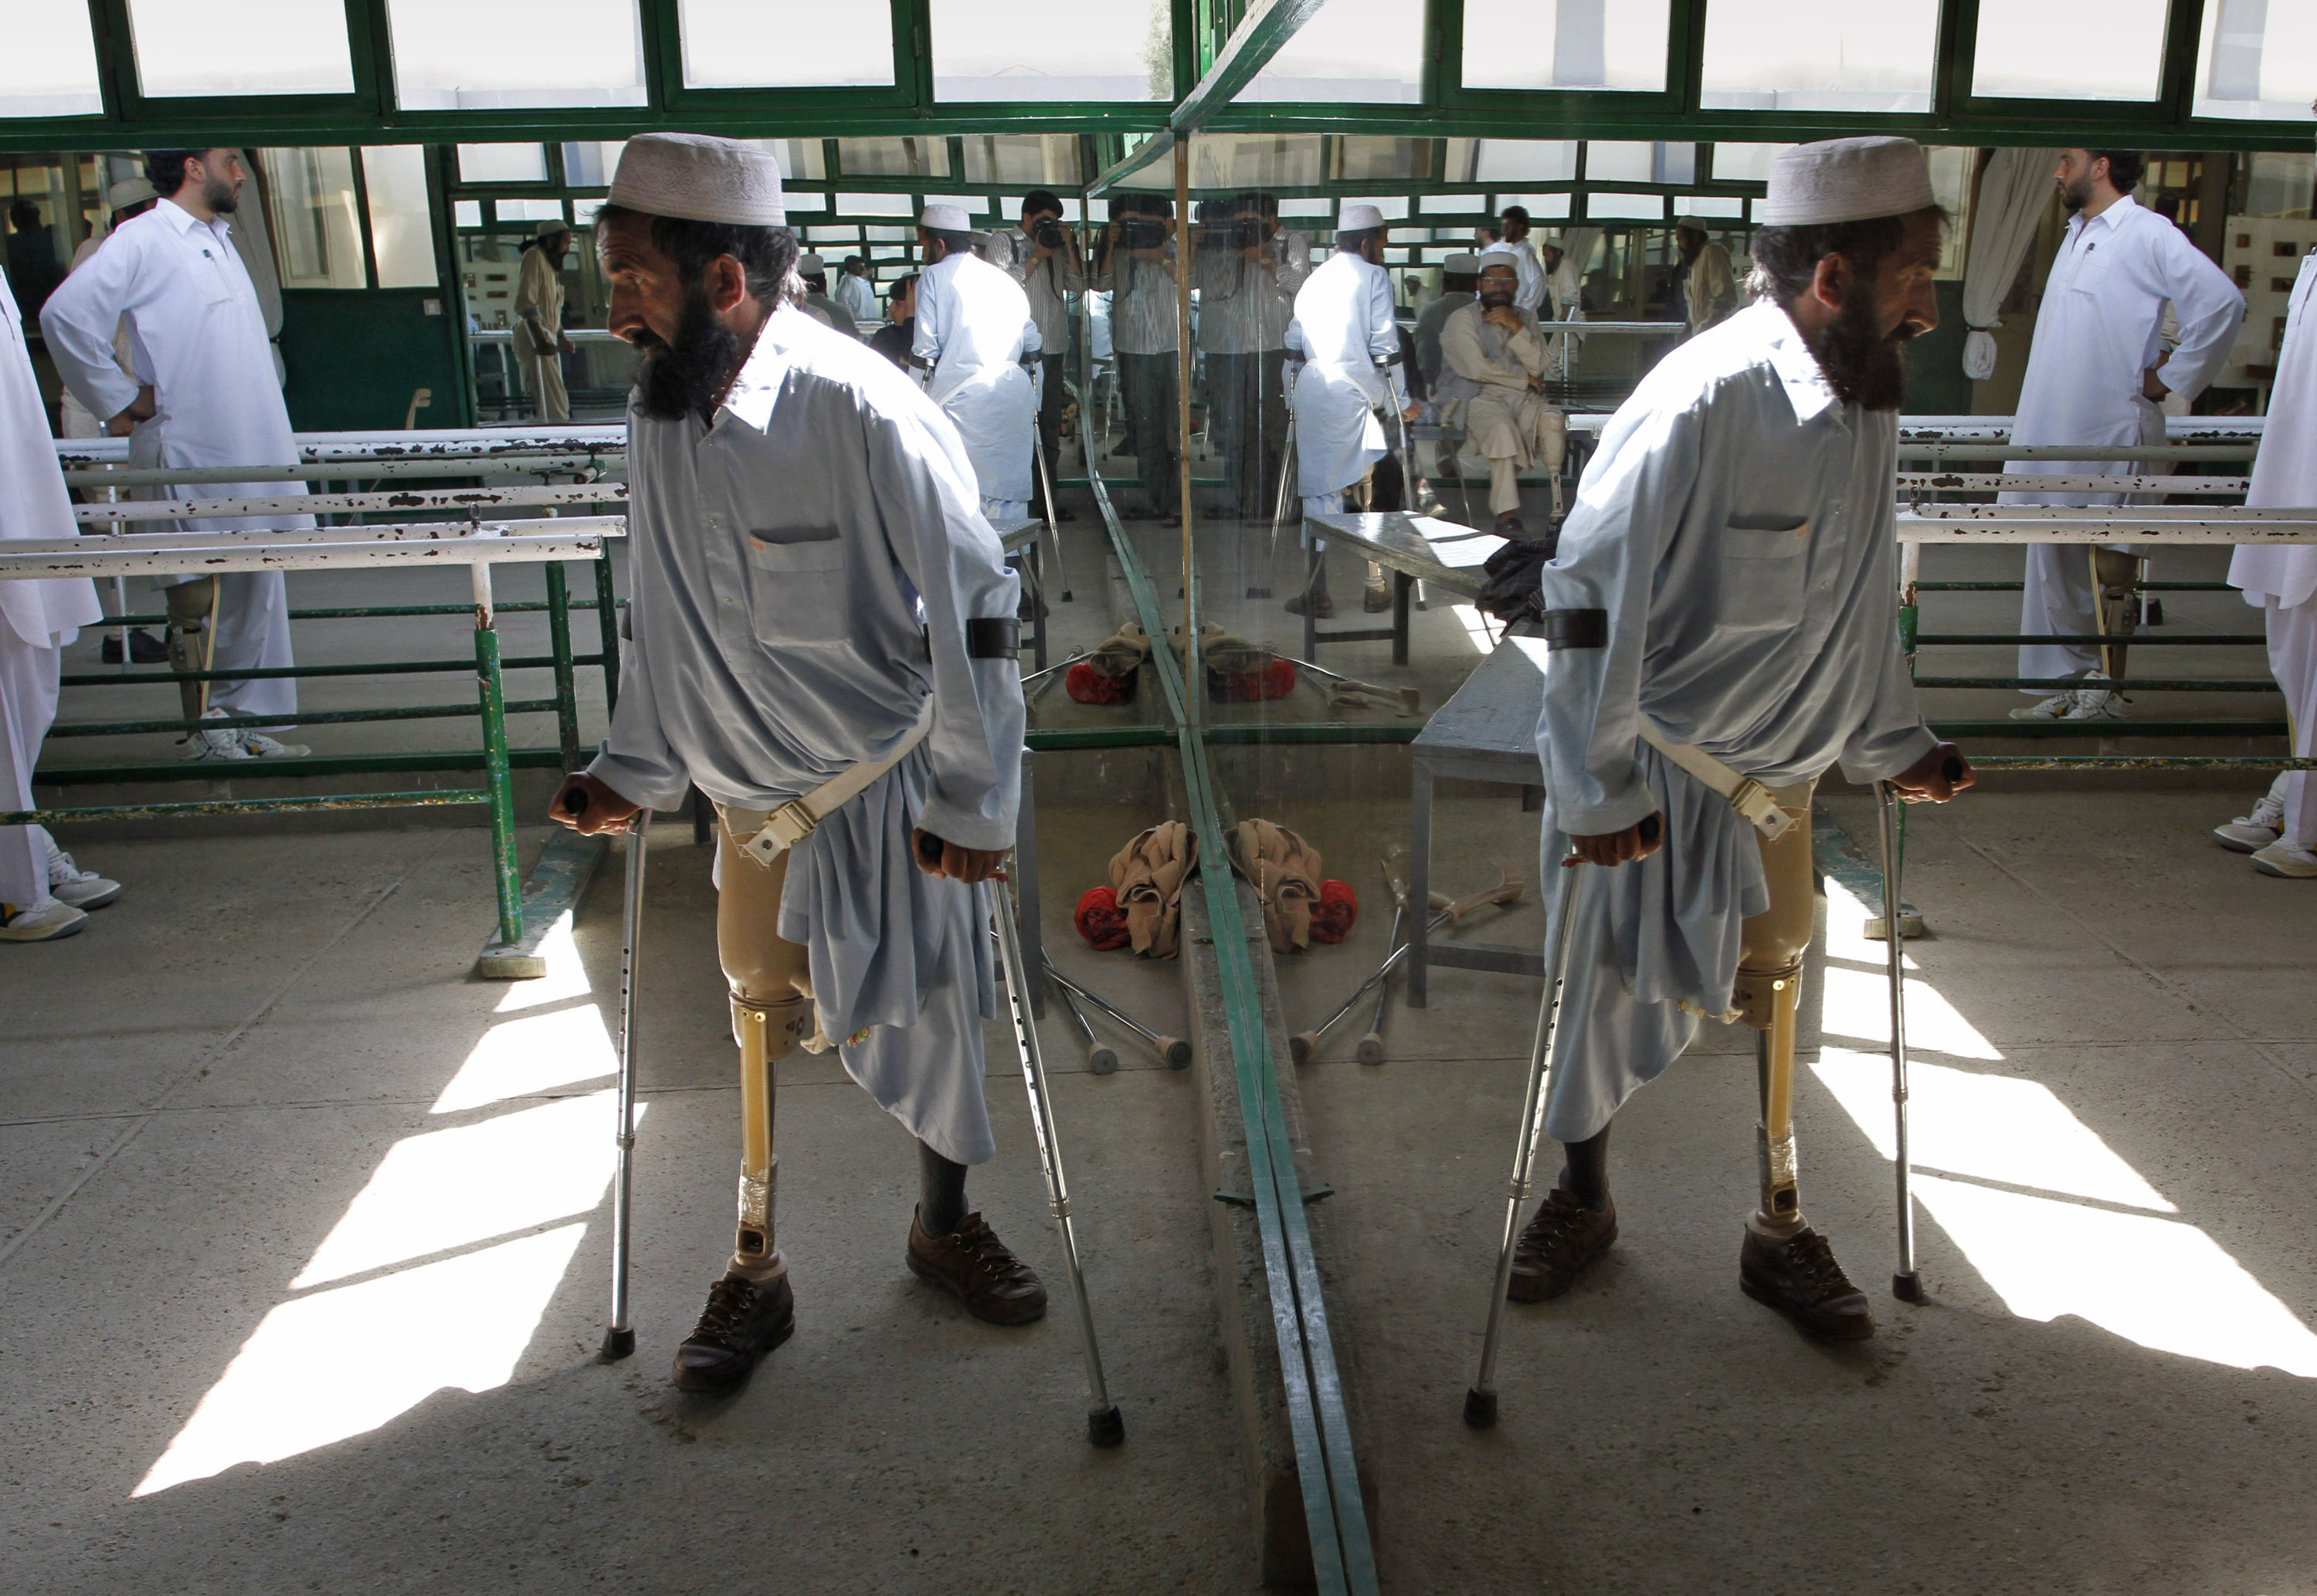 An Afghan victim of landmine walks with his new artificial leg at The International Committee of the Red Cross (ICRC) Orthopaedic Center in Kabul, Afghanistan, on Wednesday, March 31, 2010, ahead of International Mine Action Day that falls on April 4. (AP Photo/Musadeq Sadeq)